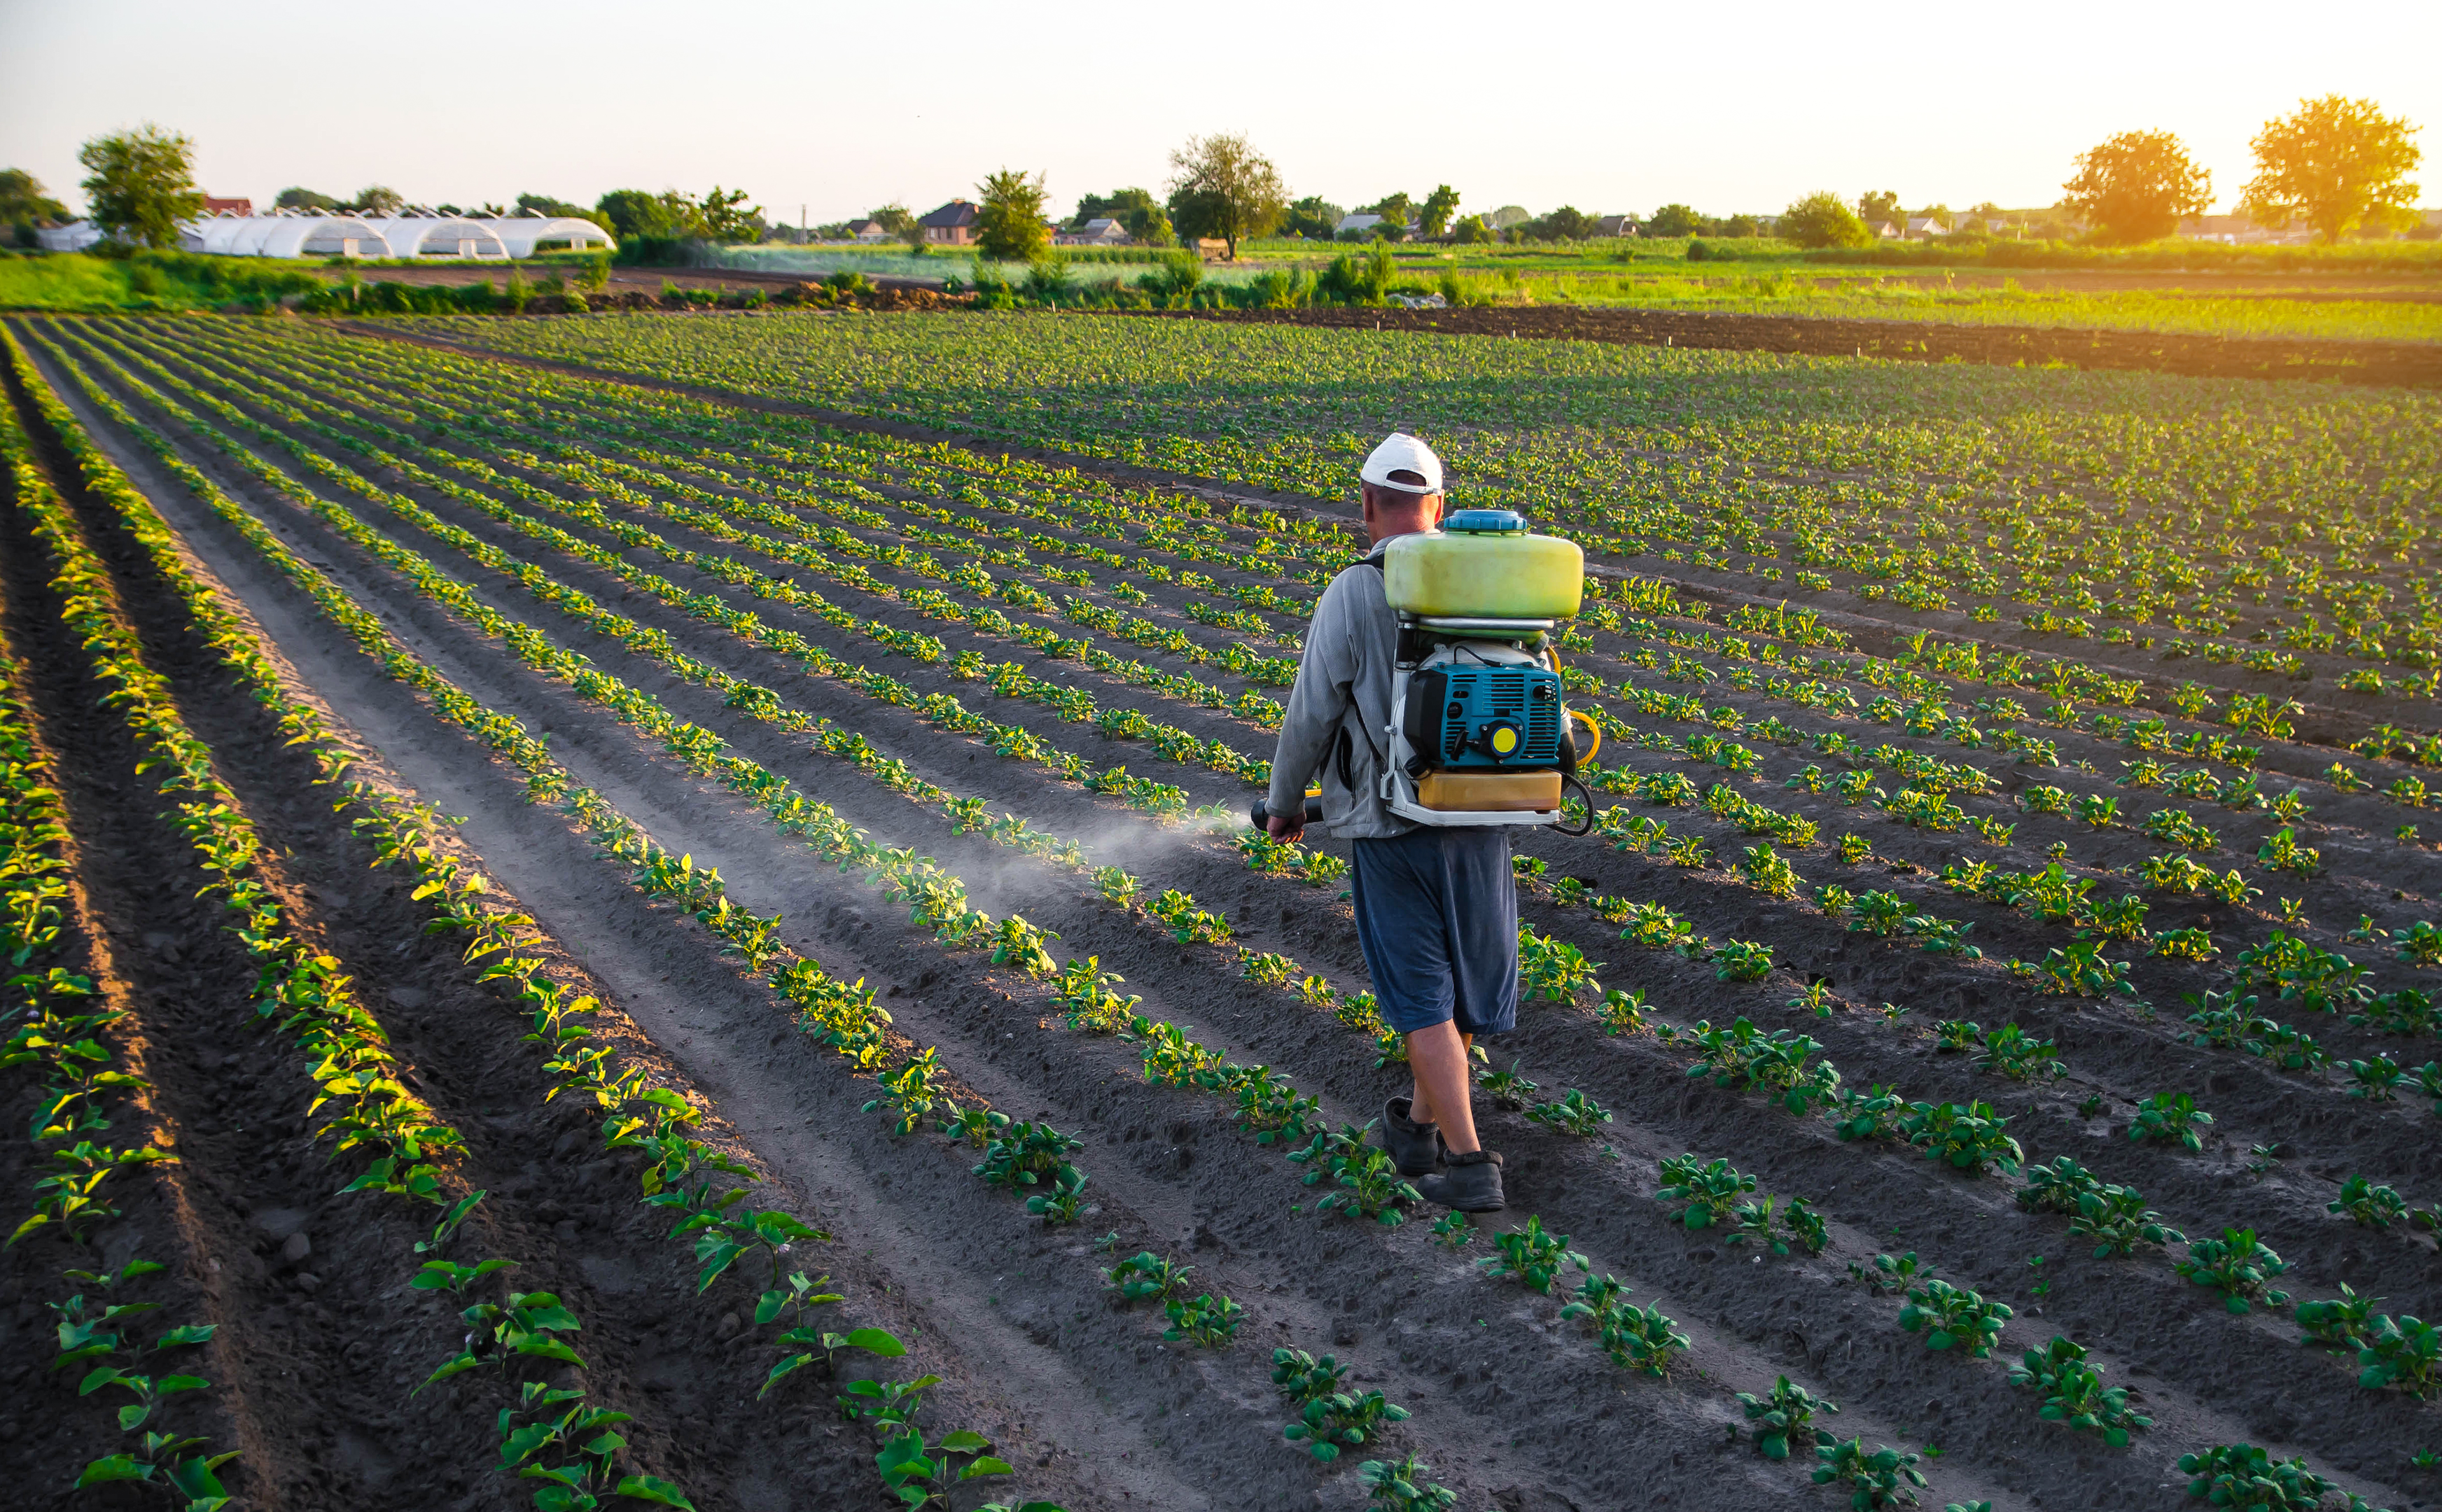 A farmer spraying natural pesticides on a field of organic crops